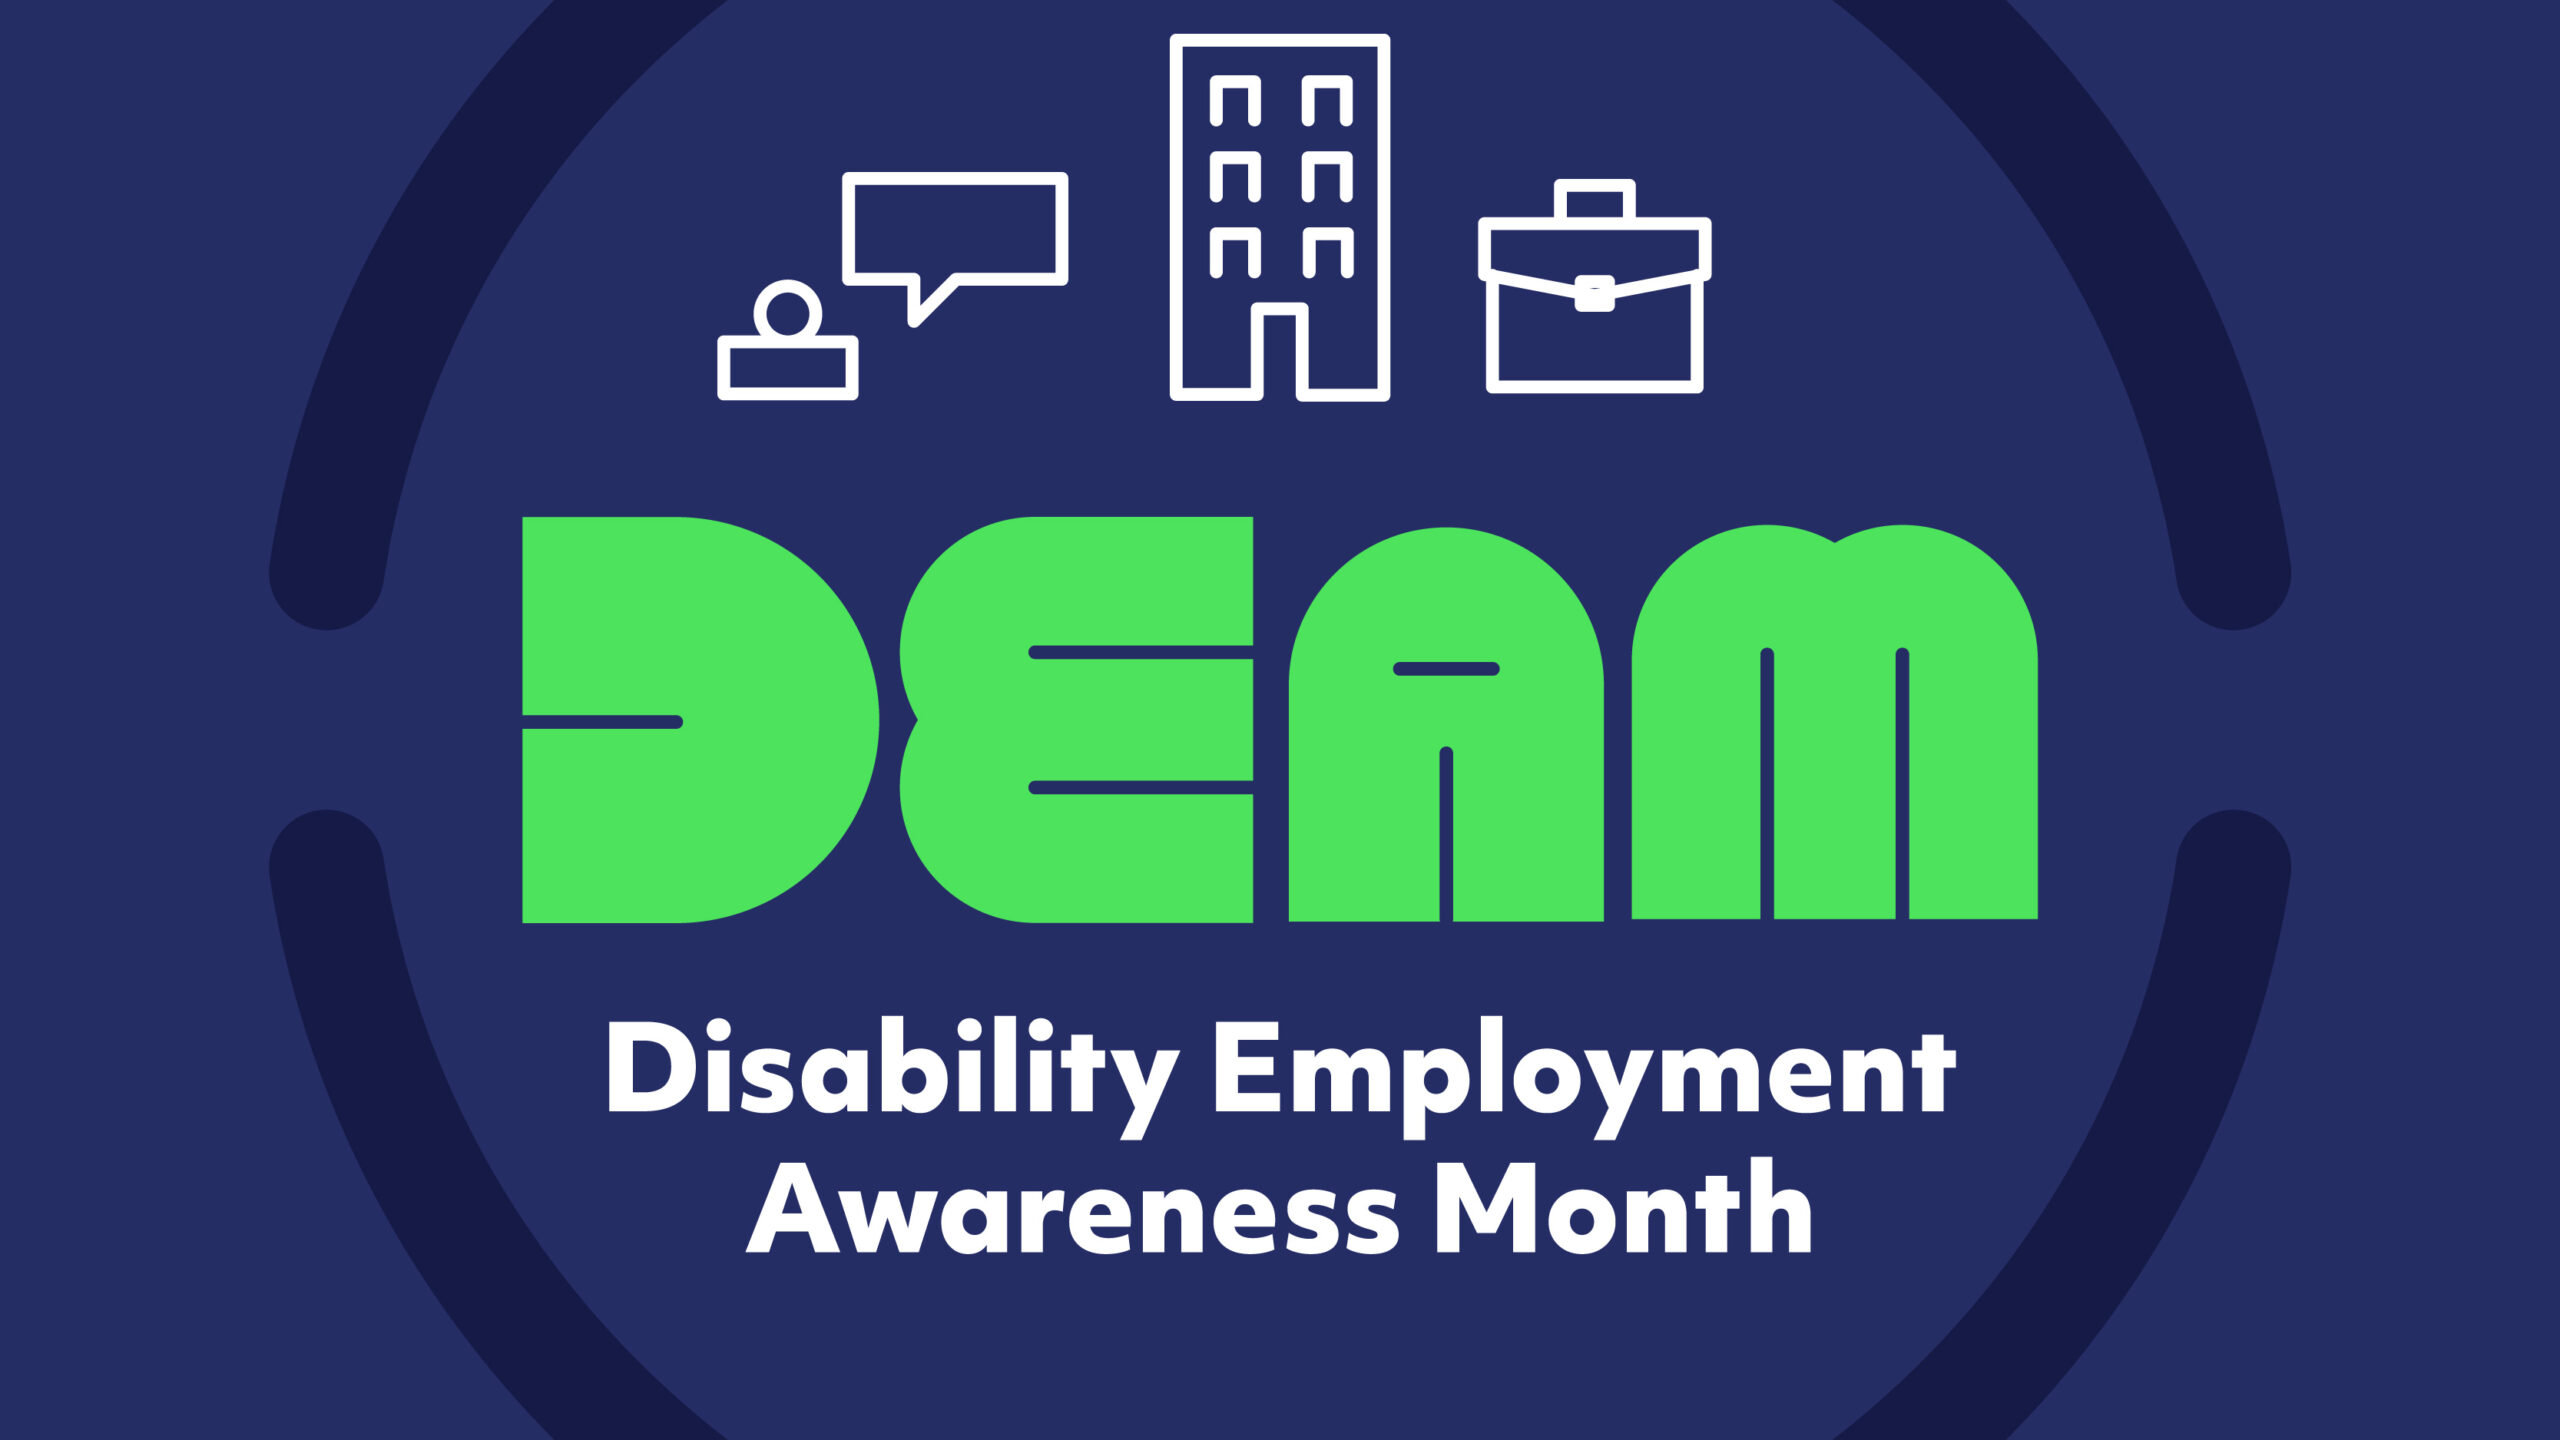 Green and white text, DEAM Disability Employment Awareness Month, in front of a dark blue background with a darker blue dashed circle and white disability icons.